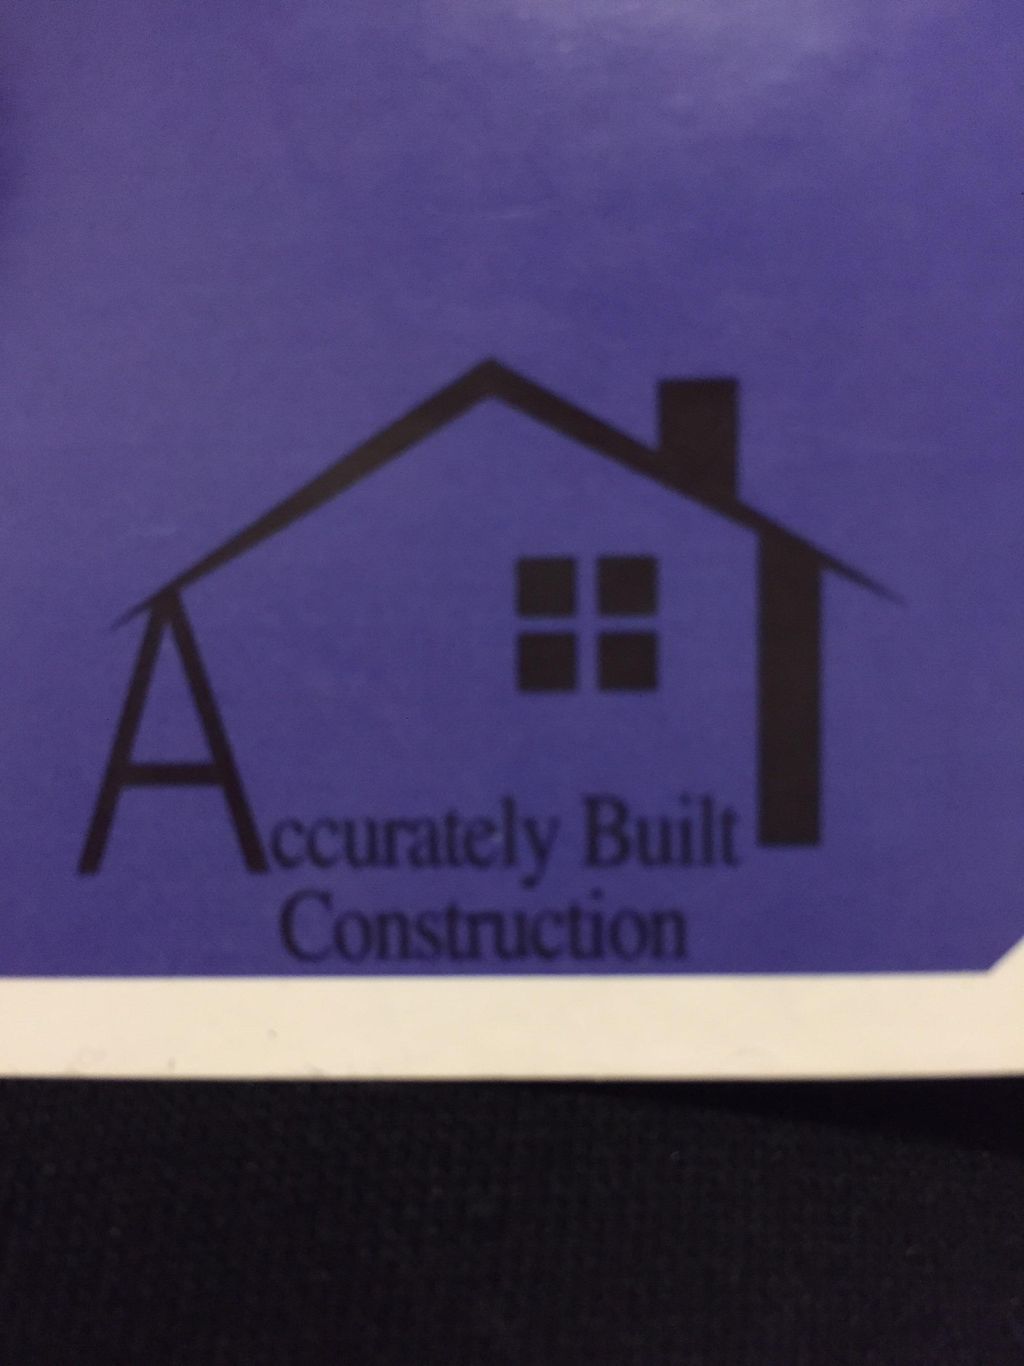 Accurately Built Construction